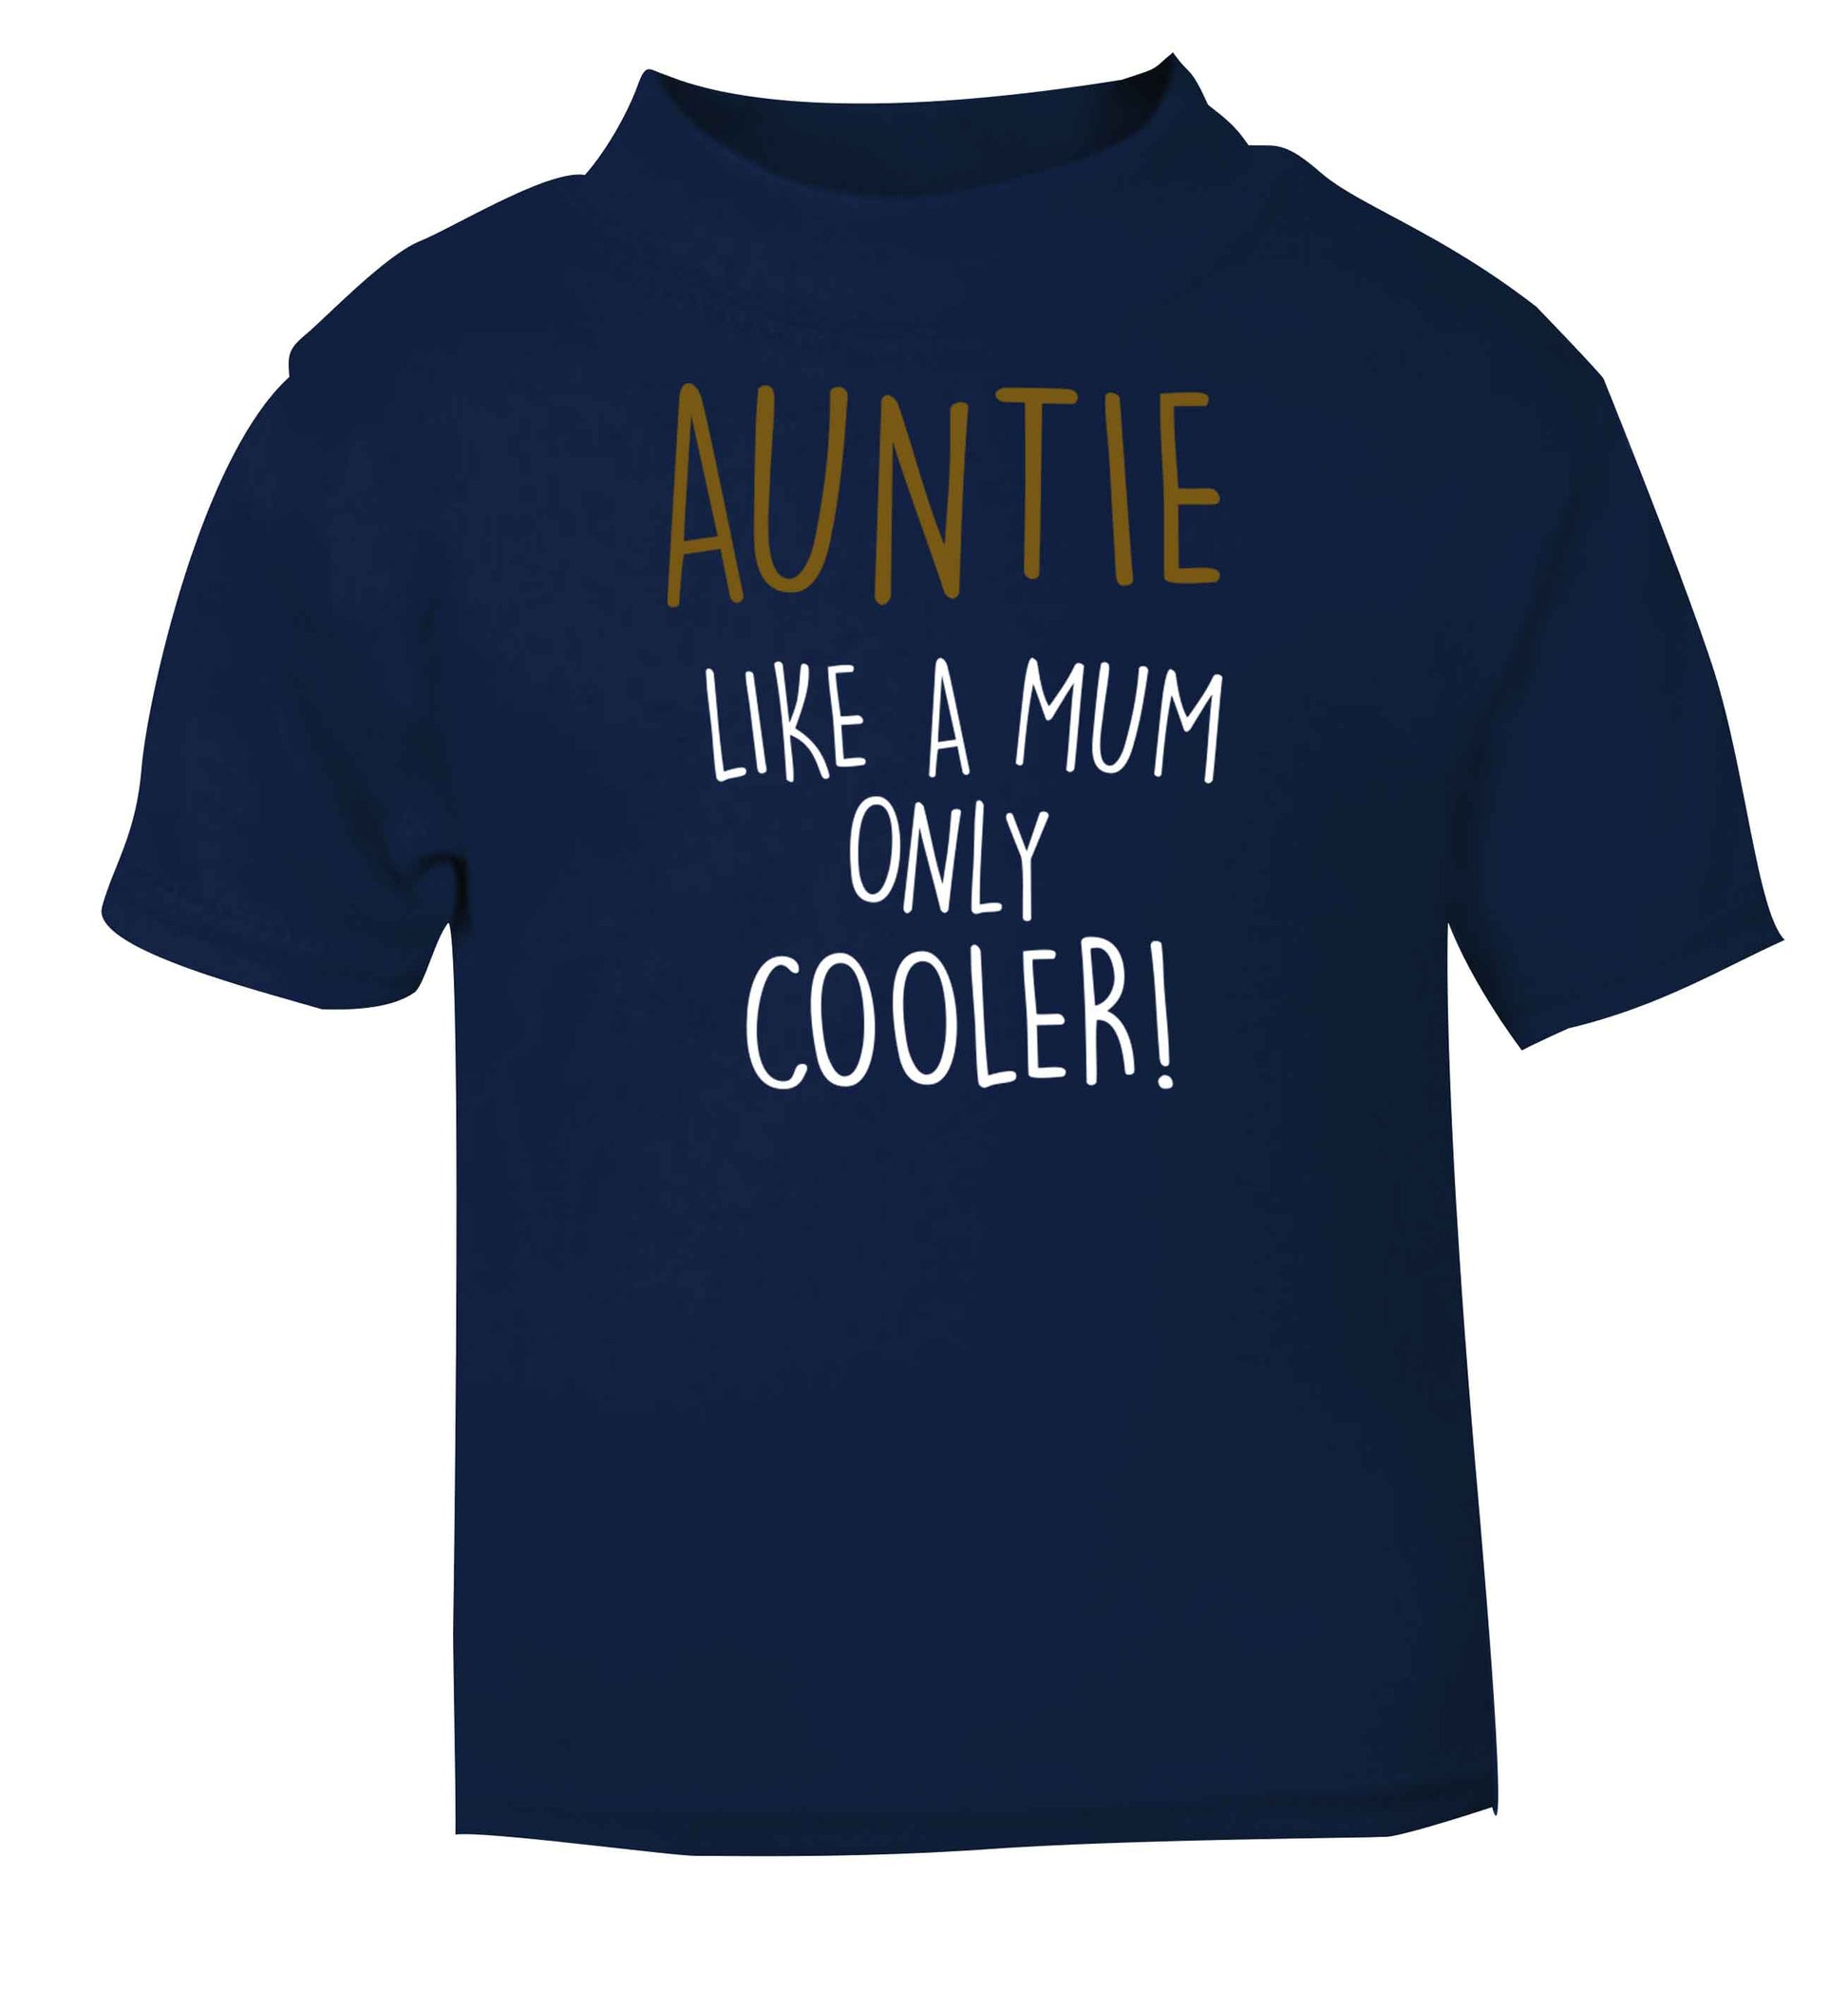 Auntie like a mum only cooler navy baby toddler Tshirt 2 Years